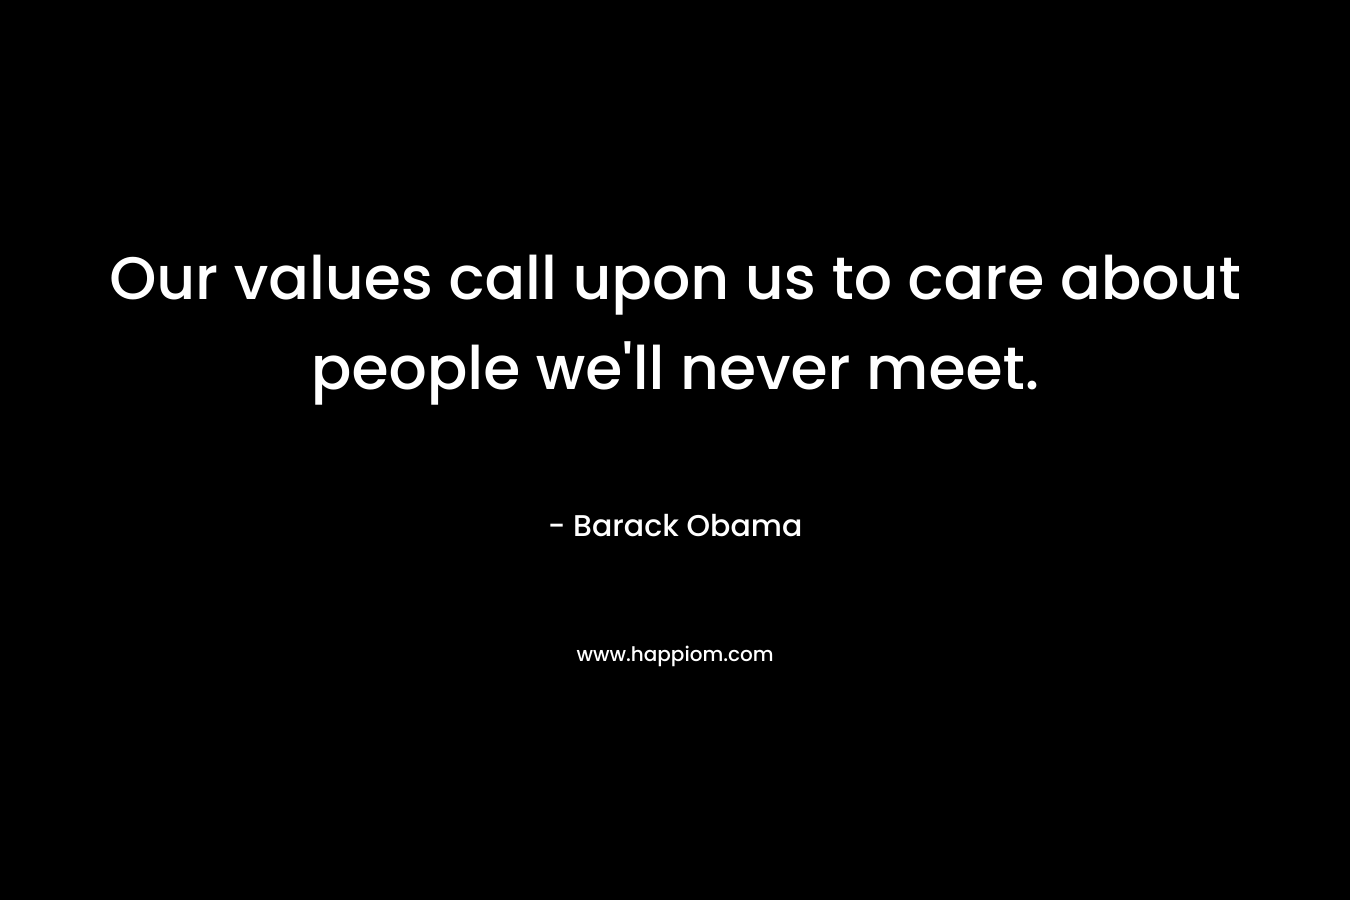 Our values call upon us to care about people we’ll never meet. – Barack Obama